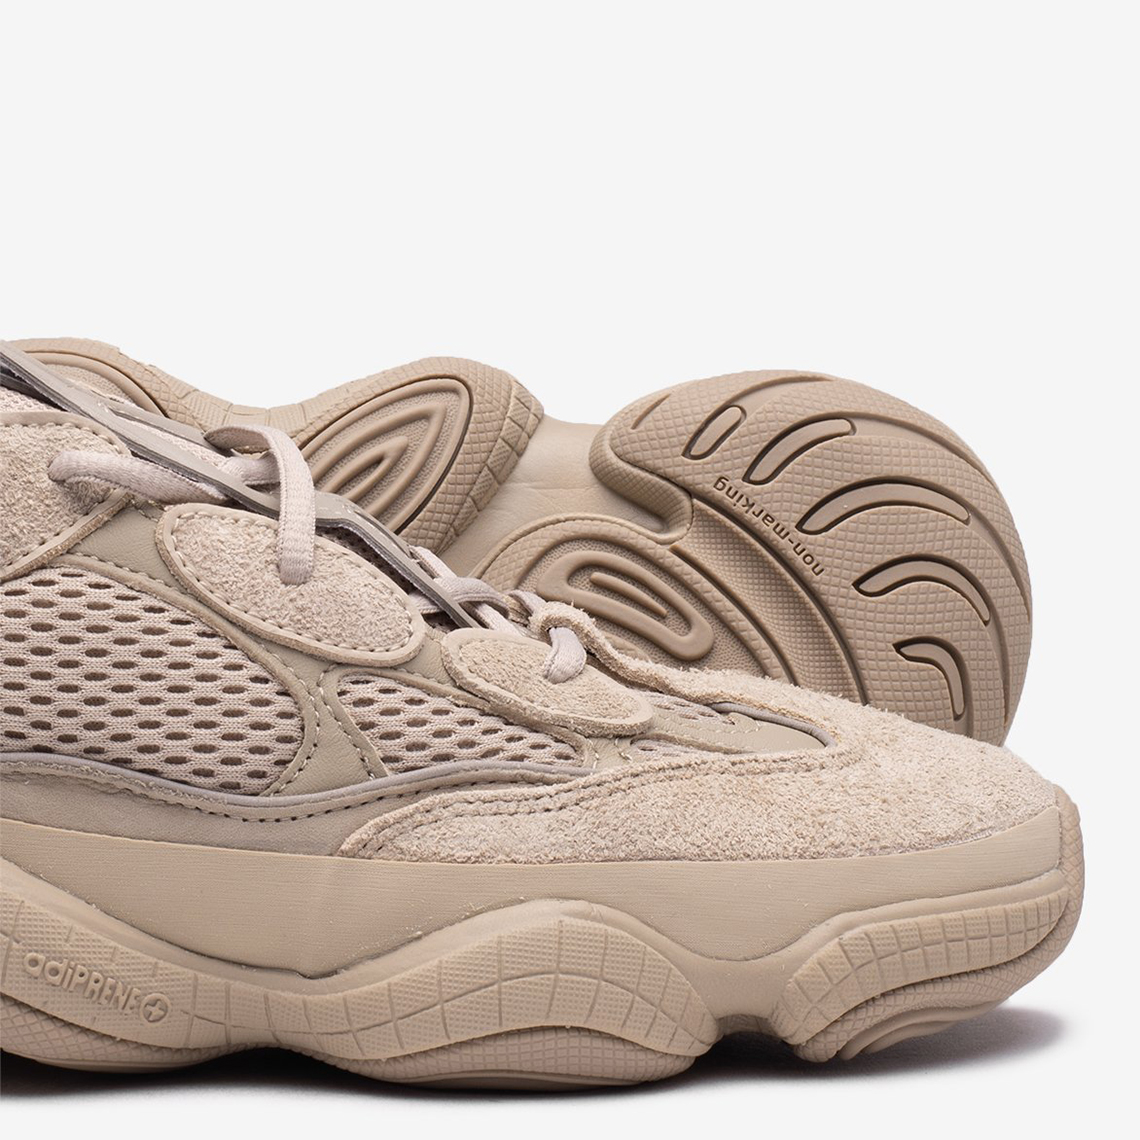 adidas Yeezy 500 Taupe Light GX3605 Release Reminder